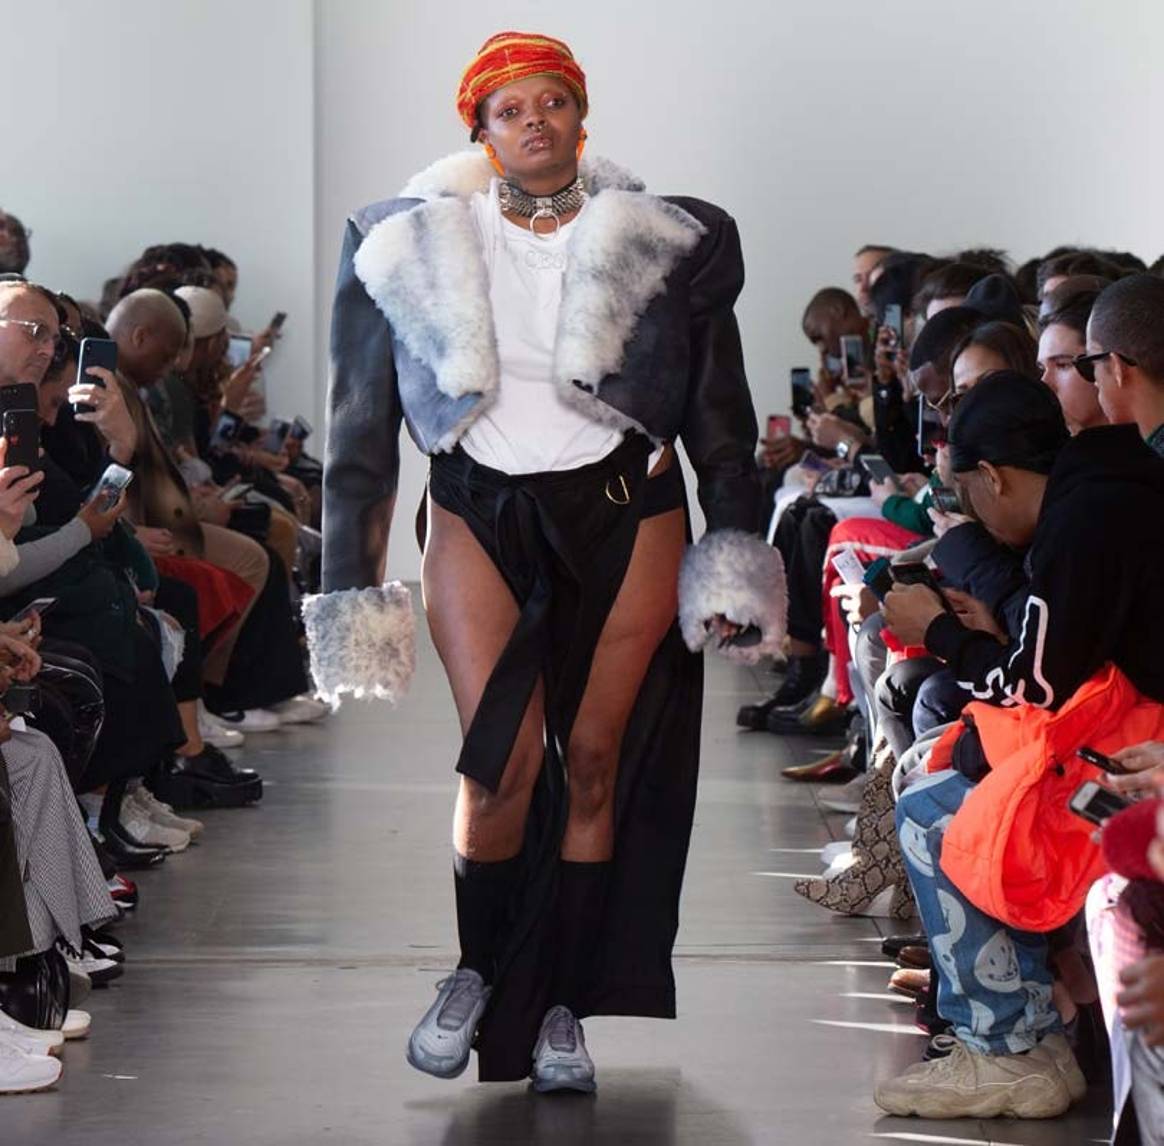 No Sesso reaches east coast consumers with NYFW